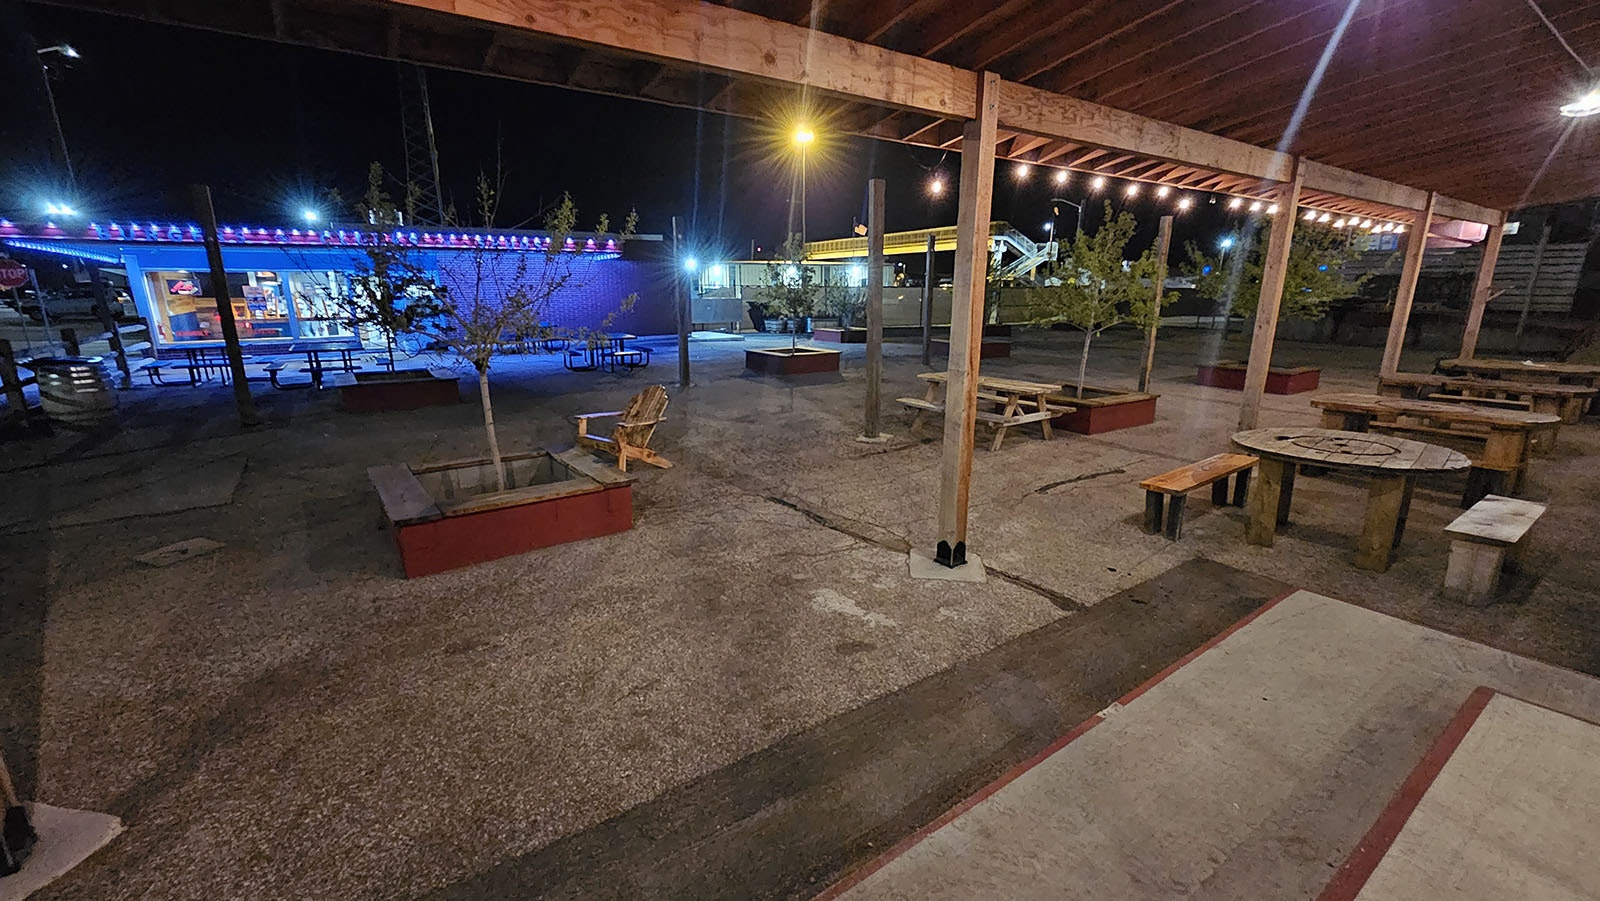 Big Lost has a large outdoor dining area for patrons who prefer to sit outside. The meadery is right across from Ranch and Roost, too, so they can order food to go with the mead.